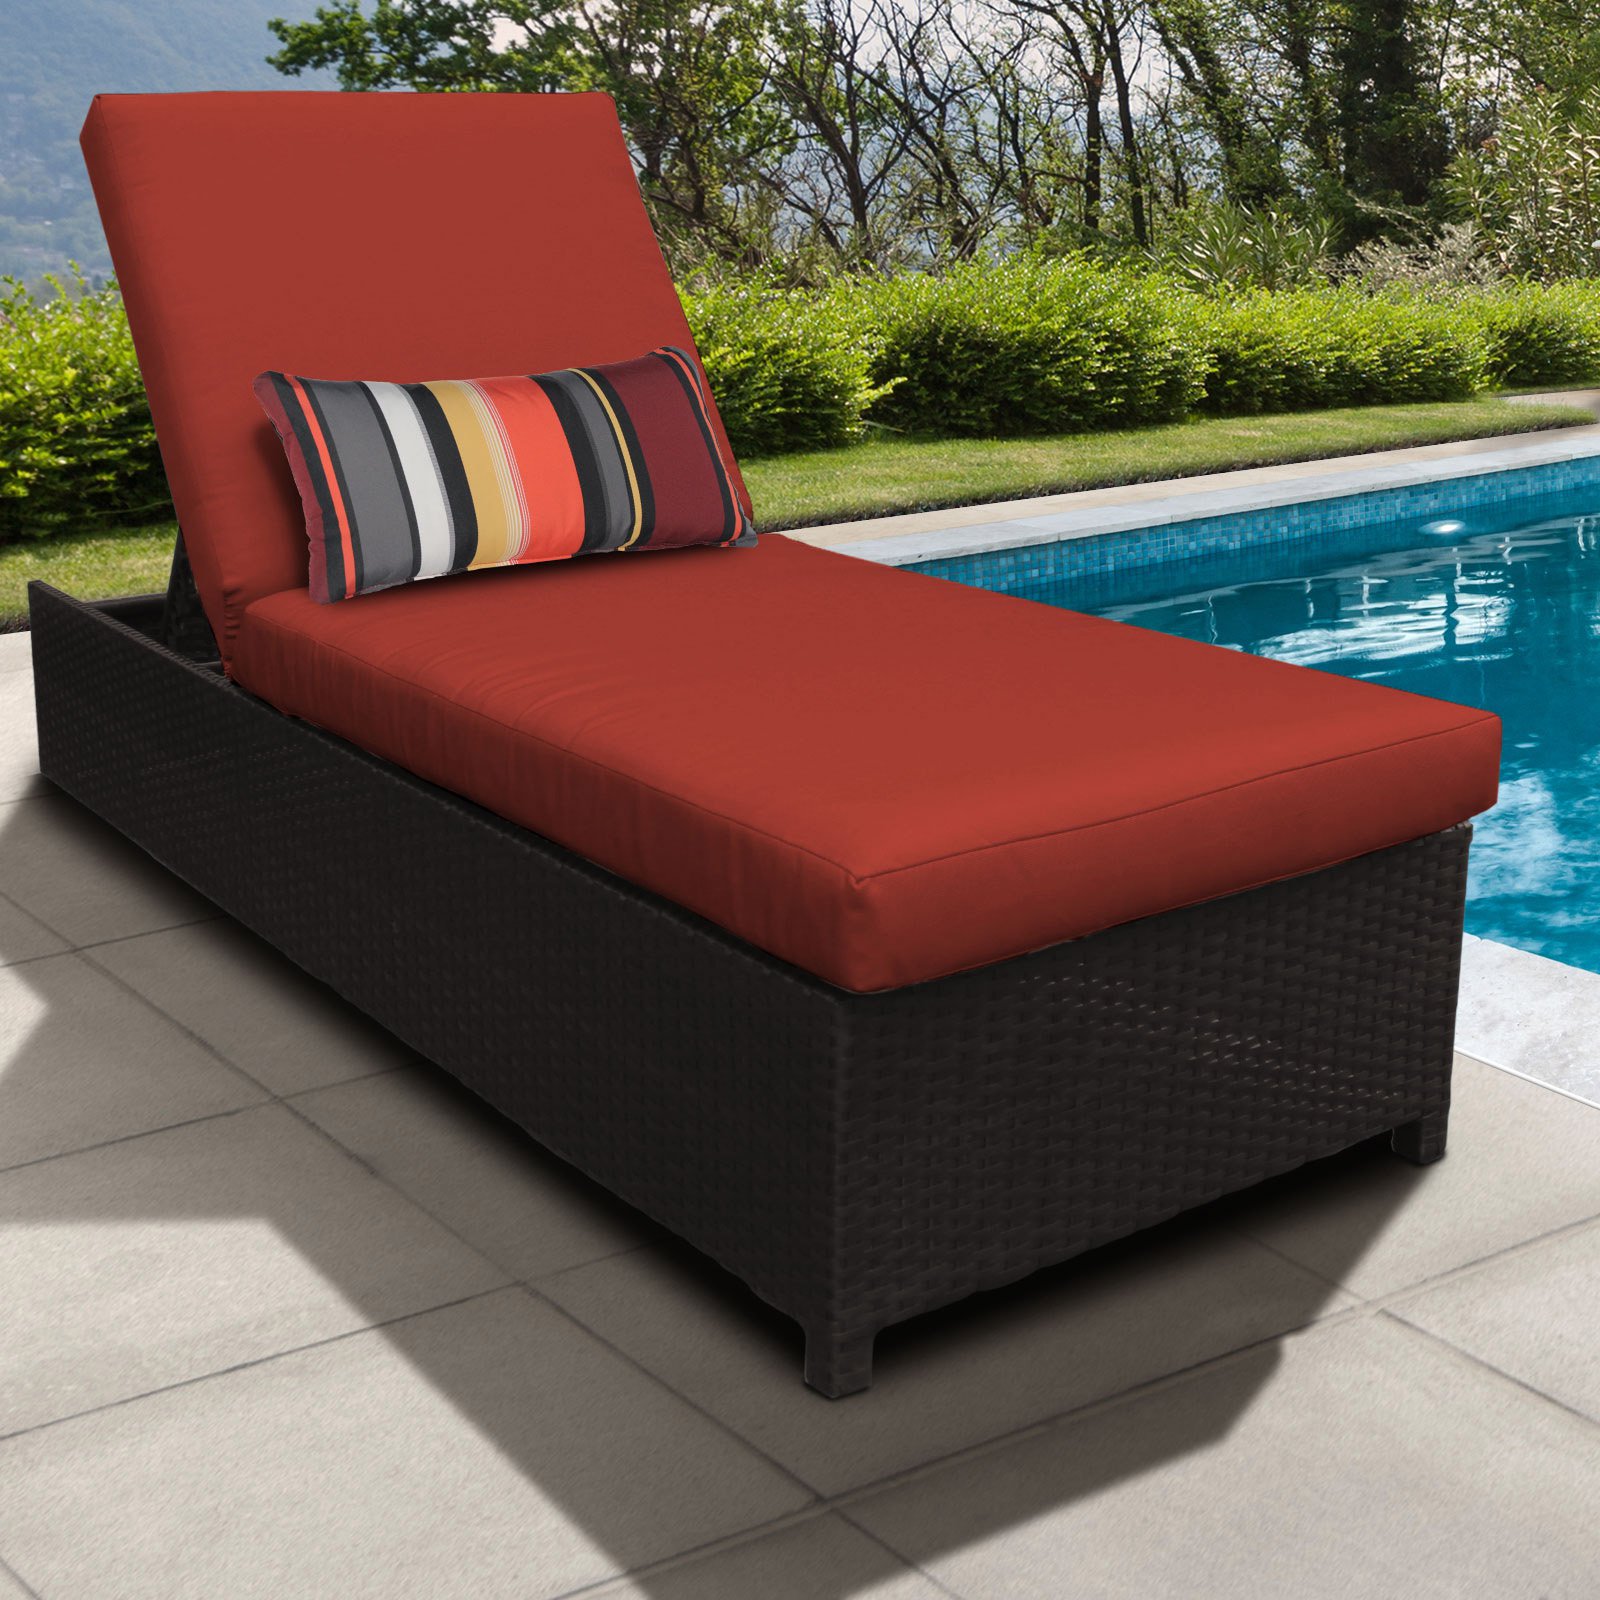 TK Classics Barbados Wheeled Wicker Outdoor Chaise Lounge Chair - image 3 of 11